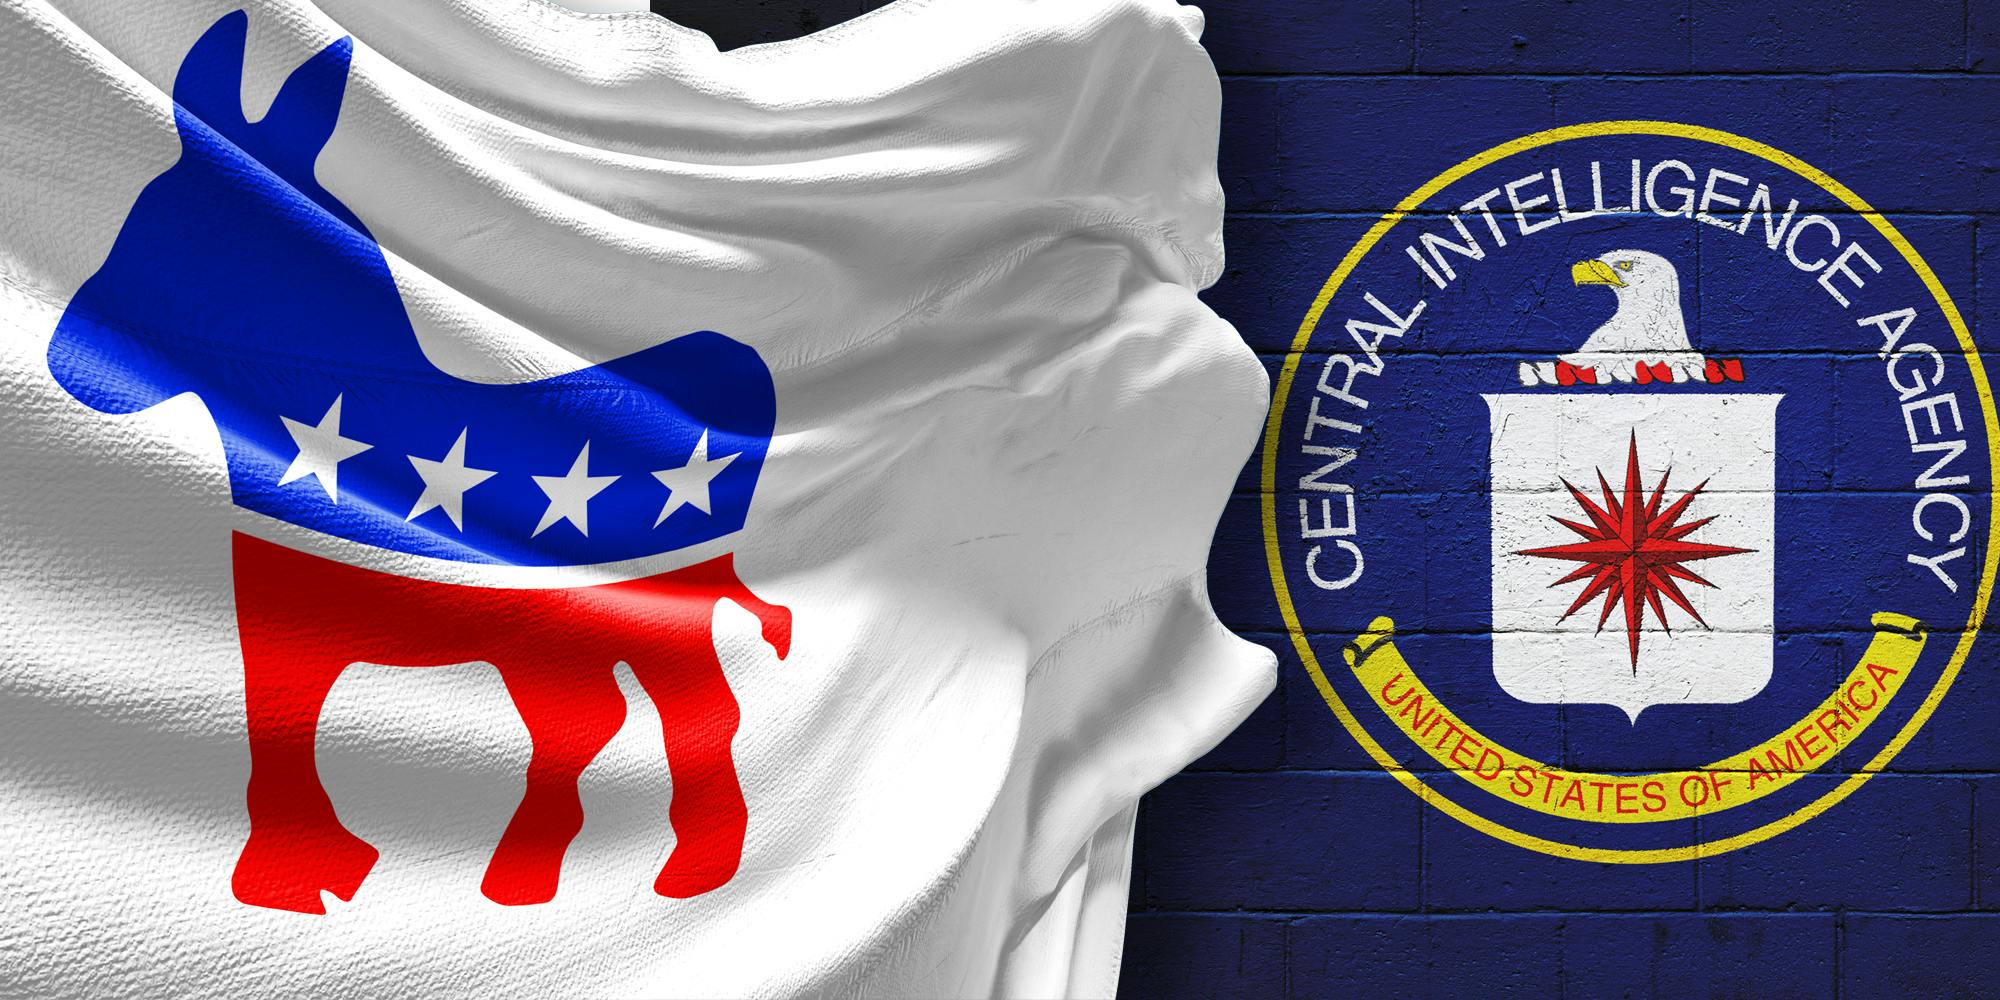 Conservatives are so shaken by people thinking they’re ‘weird’ they think the CIA must be behind it